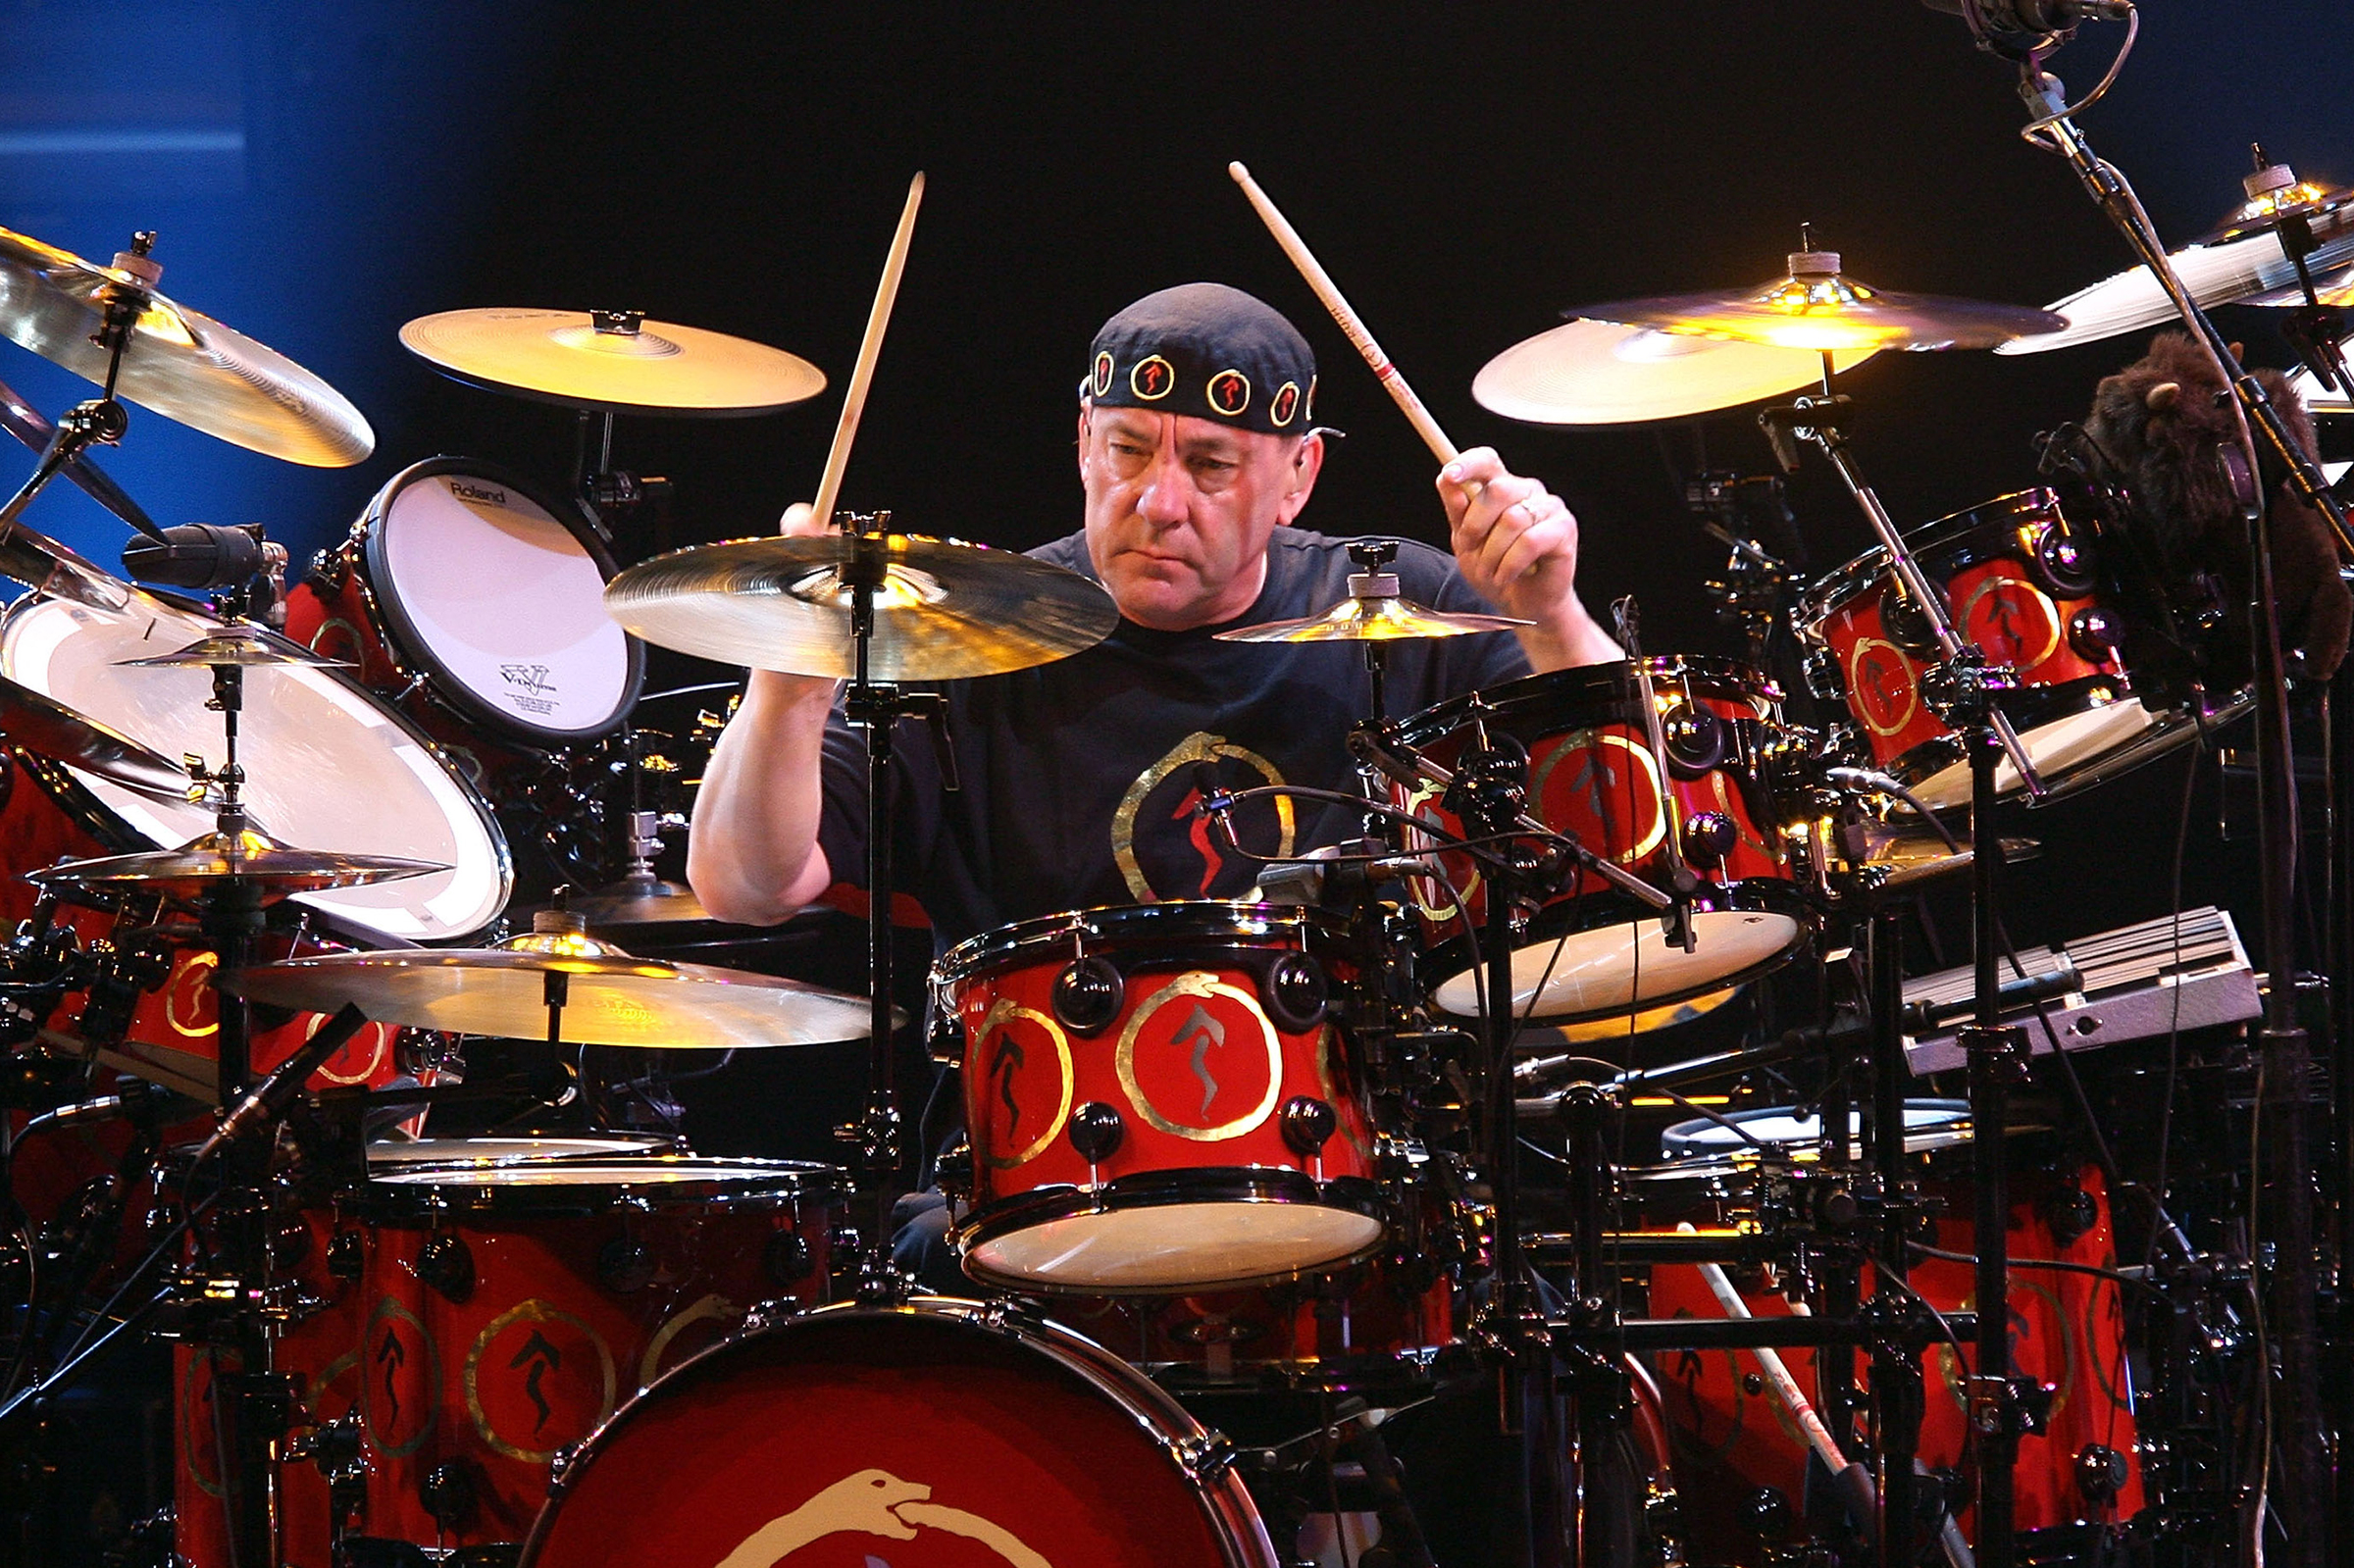 A legend’s passing marks the end of the rock band era. RIP Neil Peart